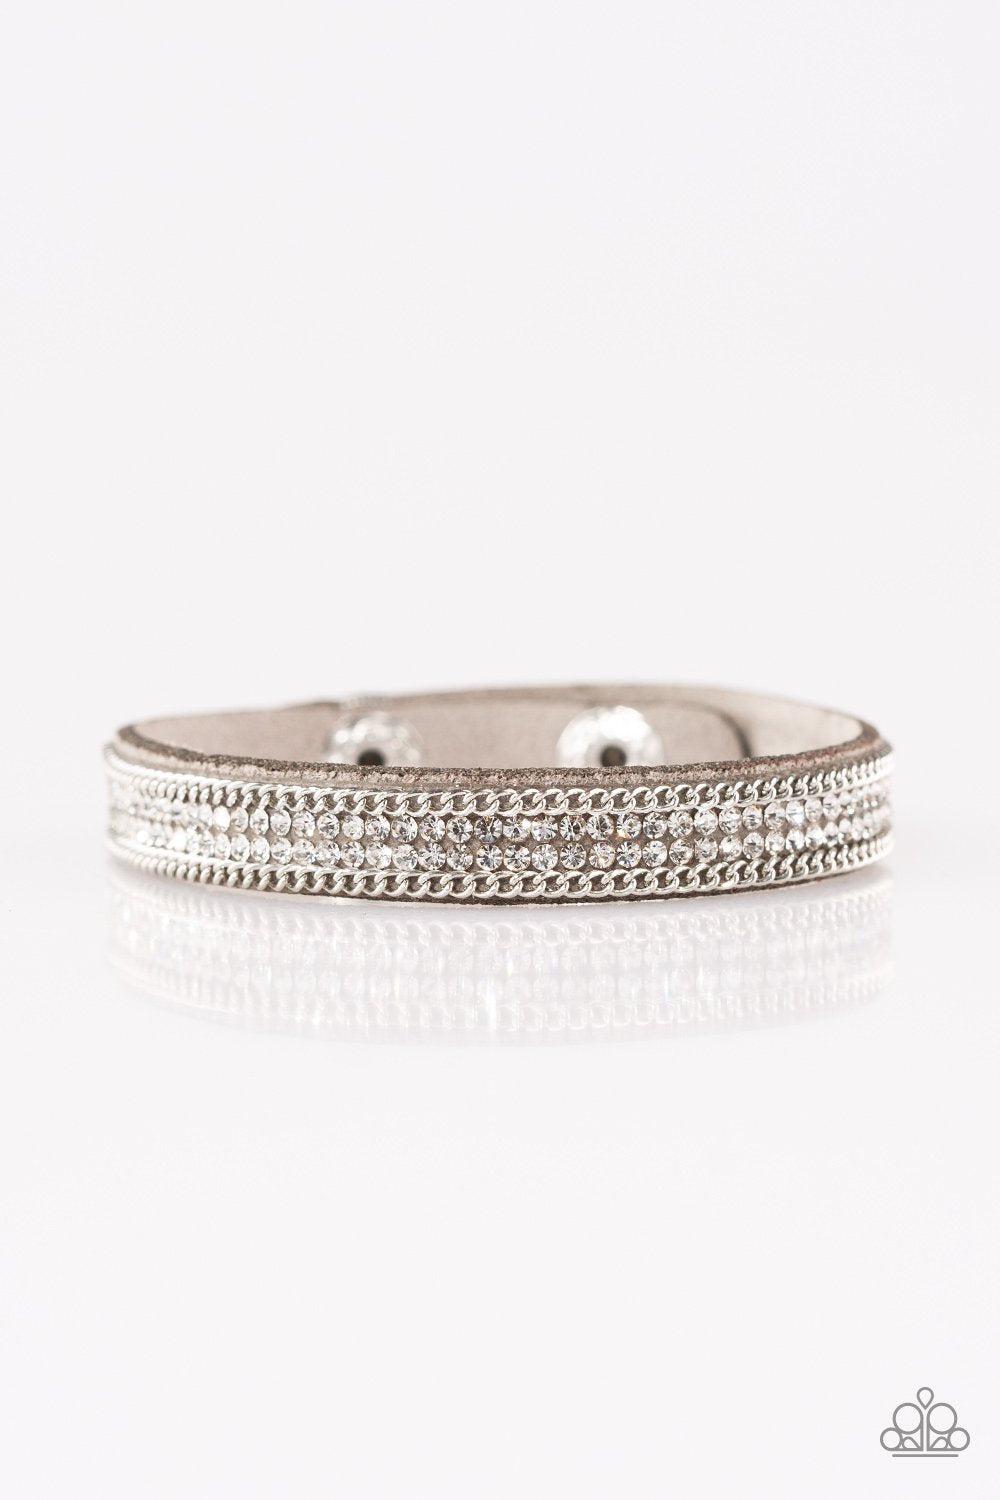 Babe Bling Silver and Rhinestone Narrow Wrap Snap Bracelet - Paparazzi Accessories-CarasShop.com - $5 Jewelry by Cara Jewels